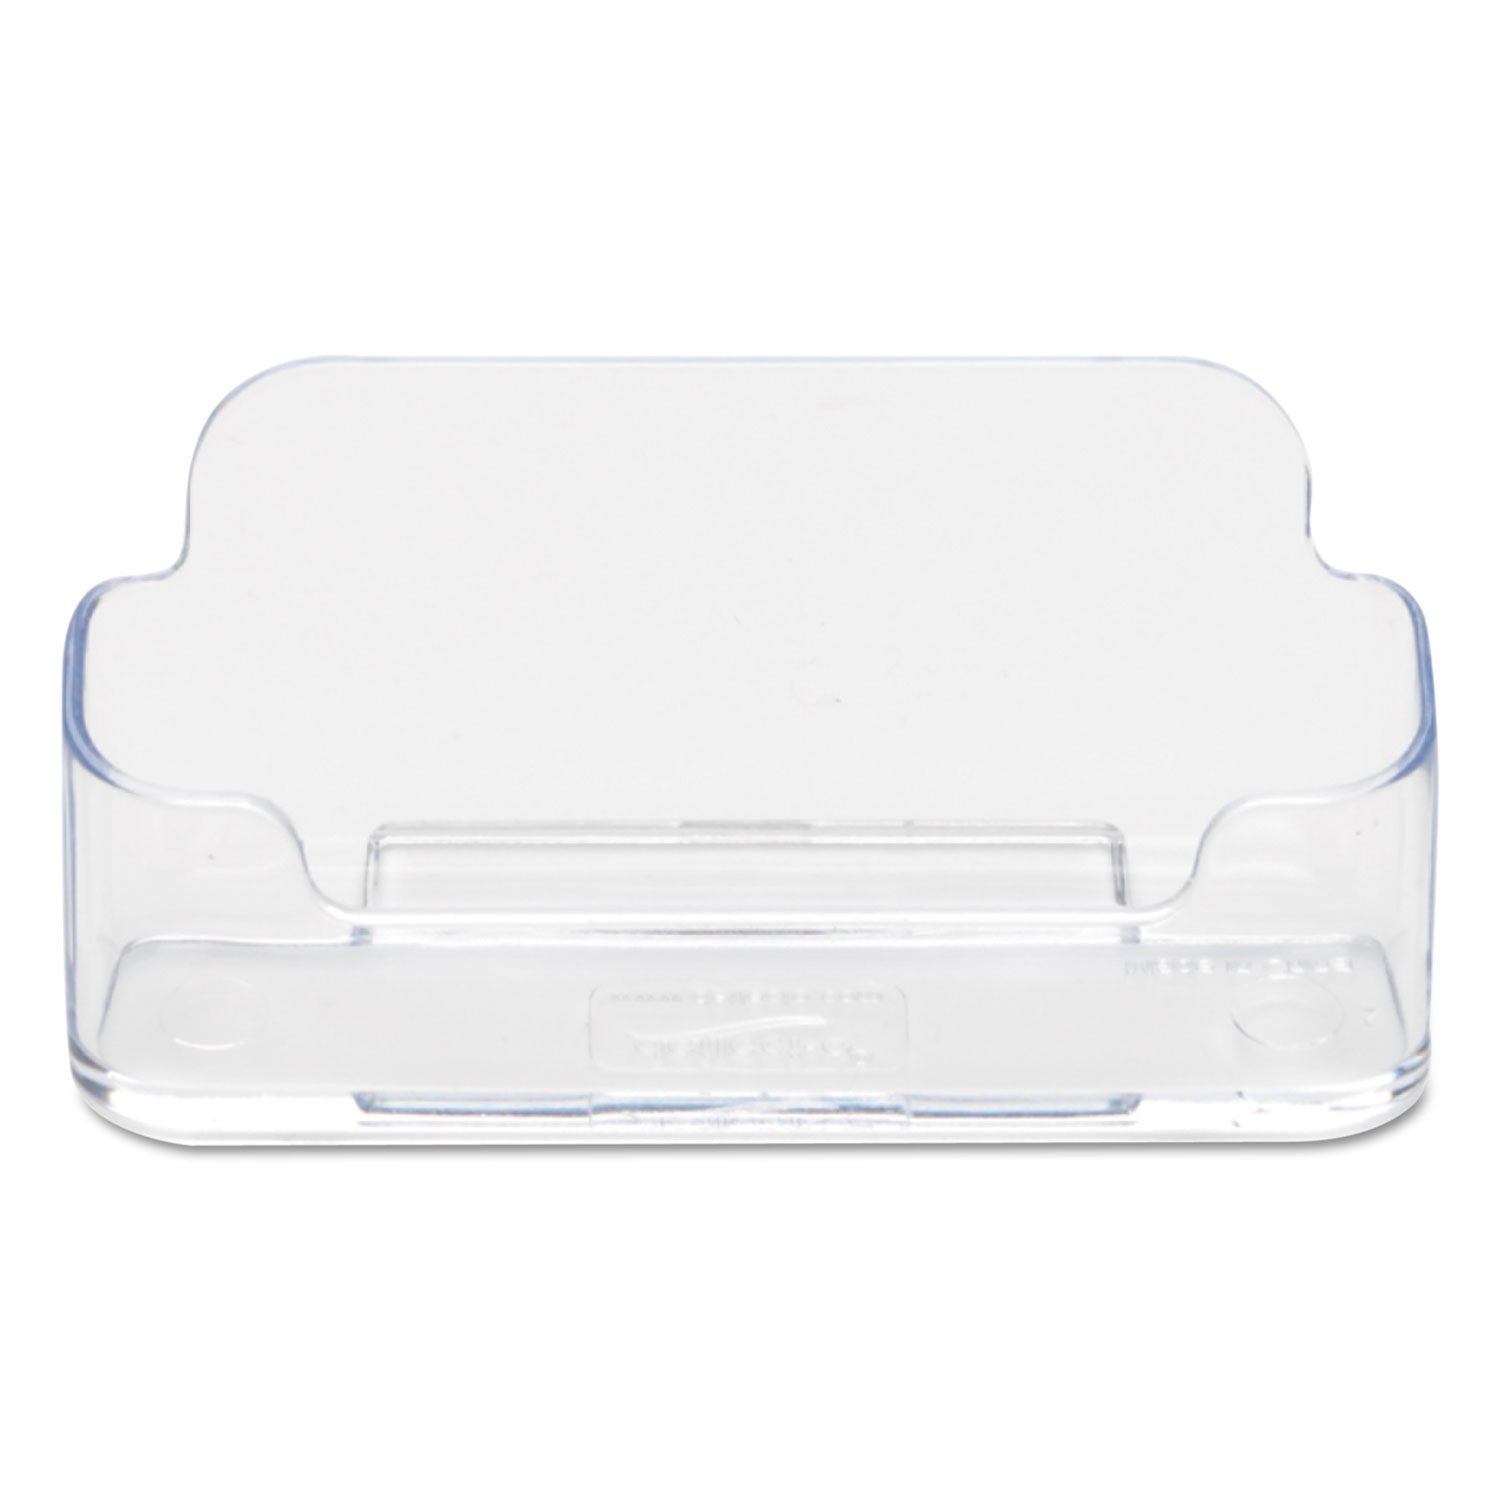 Horizontal Business Card Holder, Holds 50 Cards, 3.88 x 1.38 x 1.81, Plastic, Clear - 